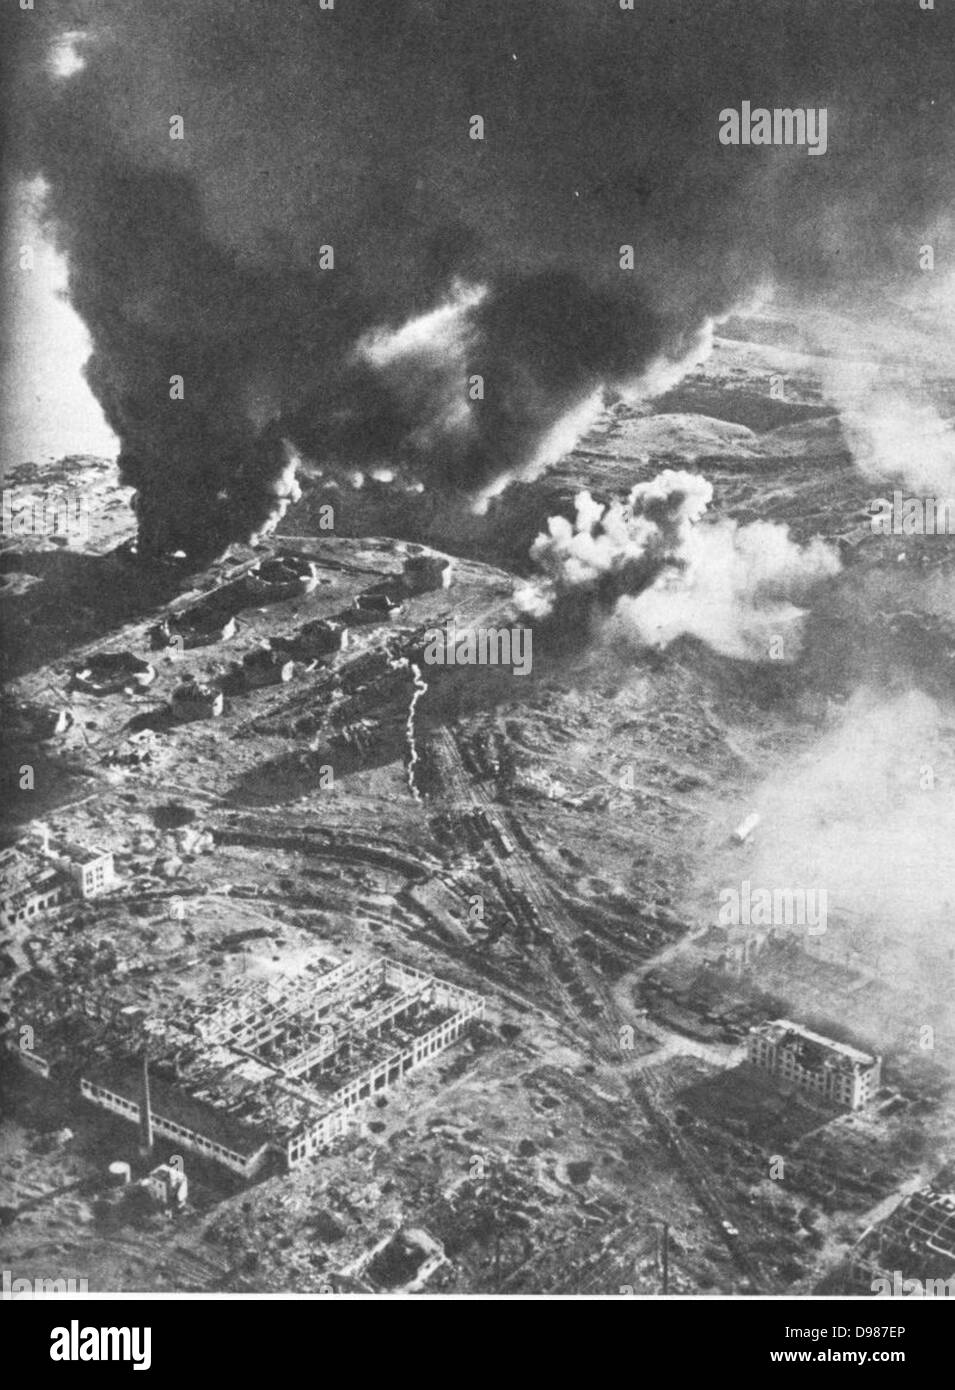 Battle of Stalingrad - Aerial view of fuel stores on fire. The Battle of Stalingrad between Germany and the Soviet Union lasted from 17 July 1942 until 2 February 1943. The mosty brutal and bloodiest of engagements of World War II,it claimed almost 2 million casualties. It is considered to be a turning point in the war, with the Soviet union victorious. Stock Photo